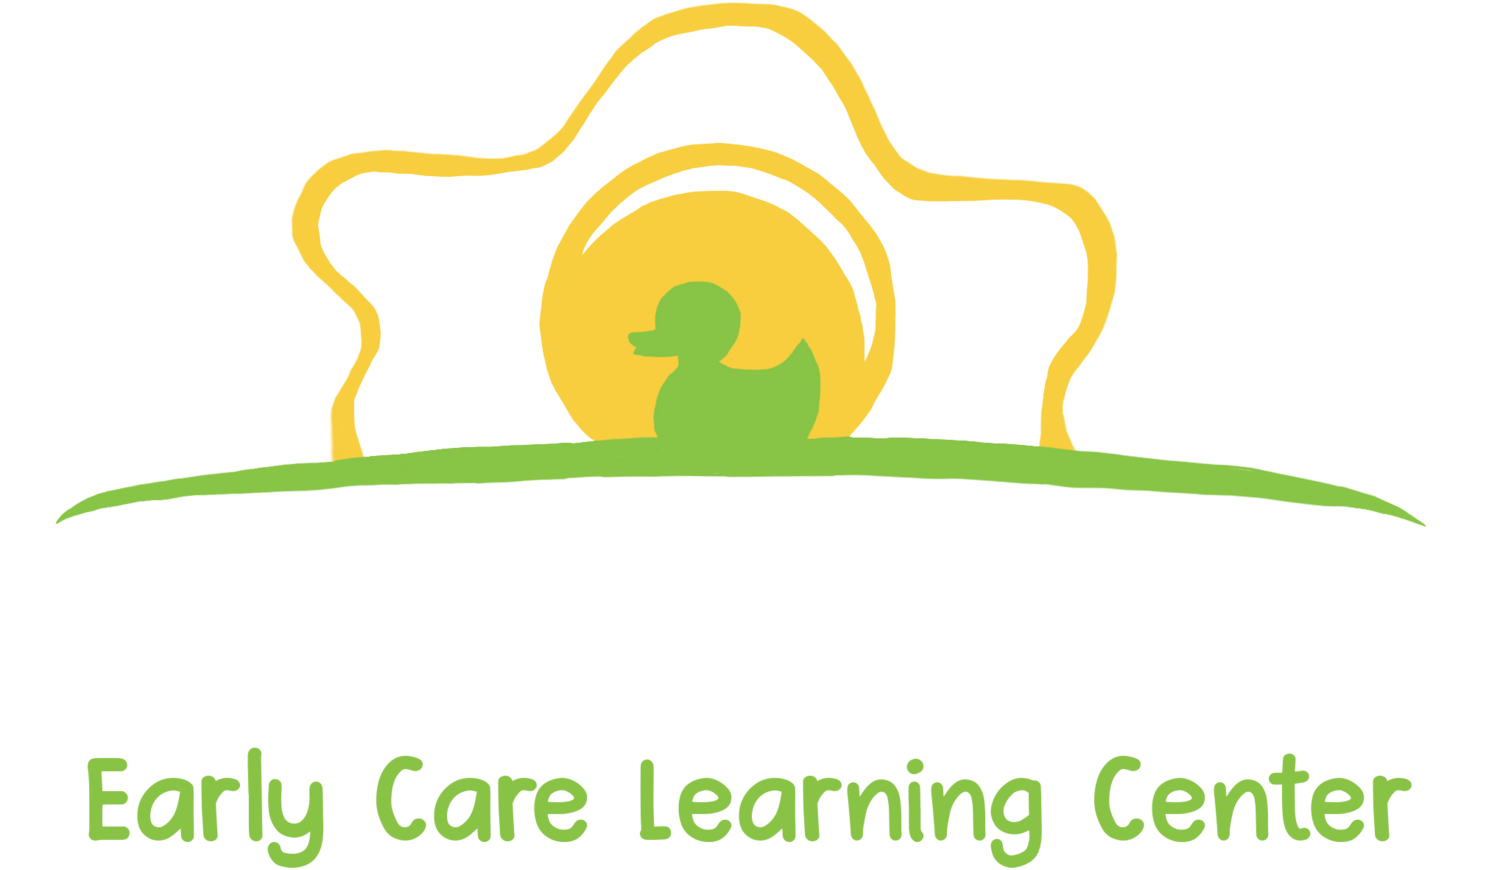 Sunny Side Up Early Care Learning Center - Preschool with Family ...